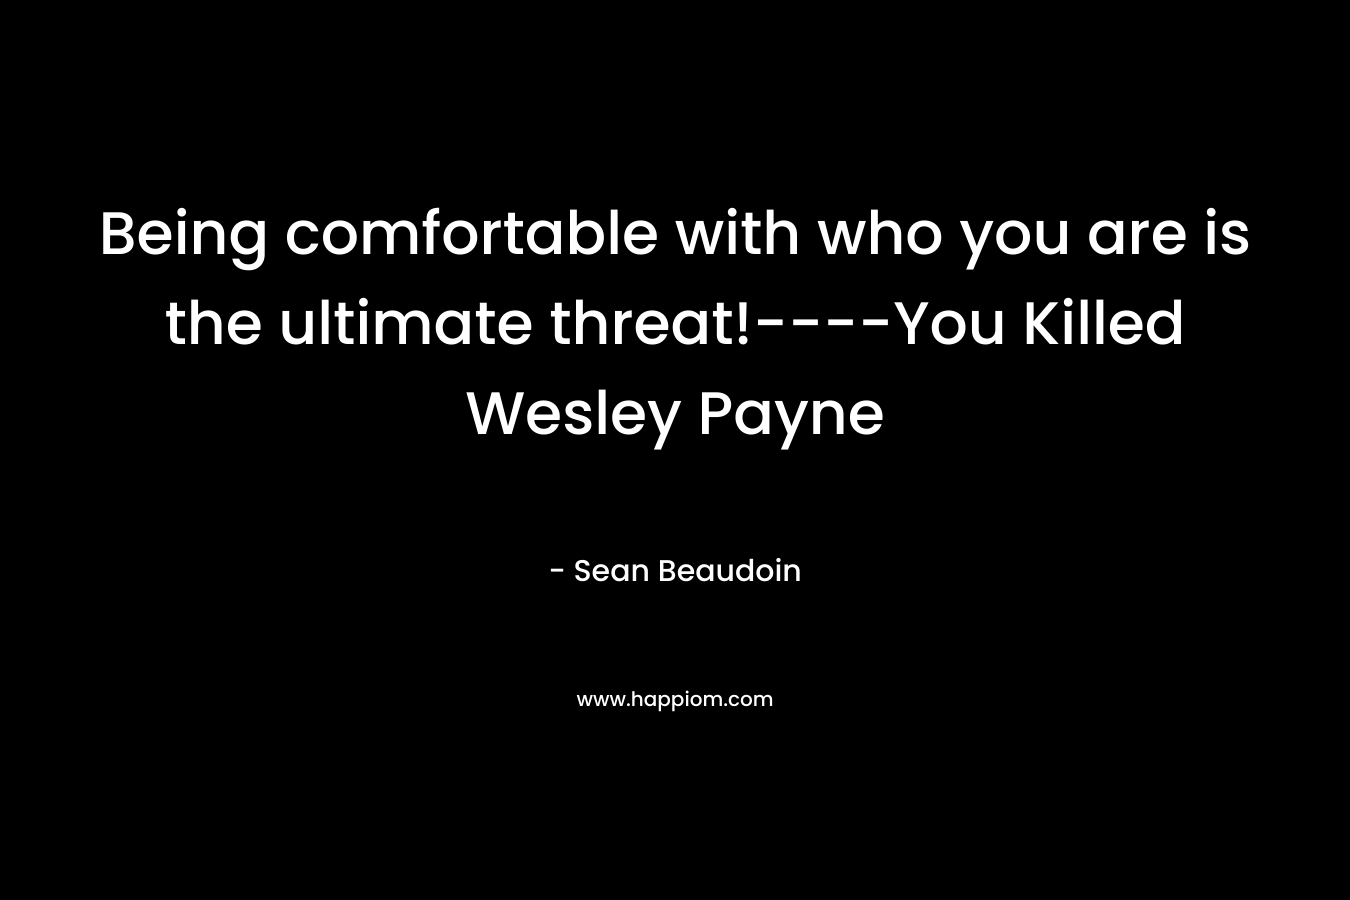 Being comfortable with who you are is the ultimate threat!----You Killed Wesley Payne